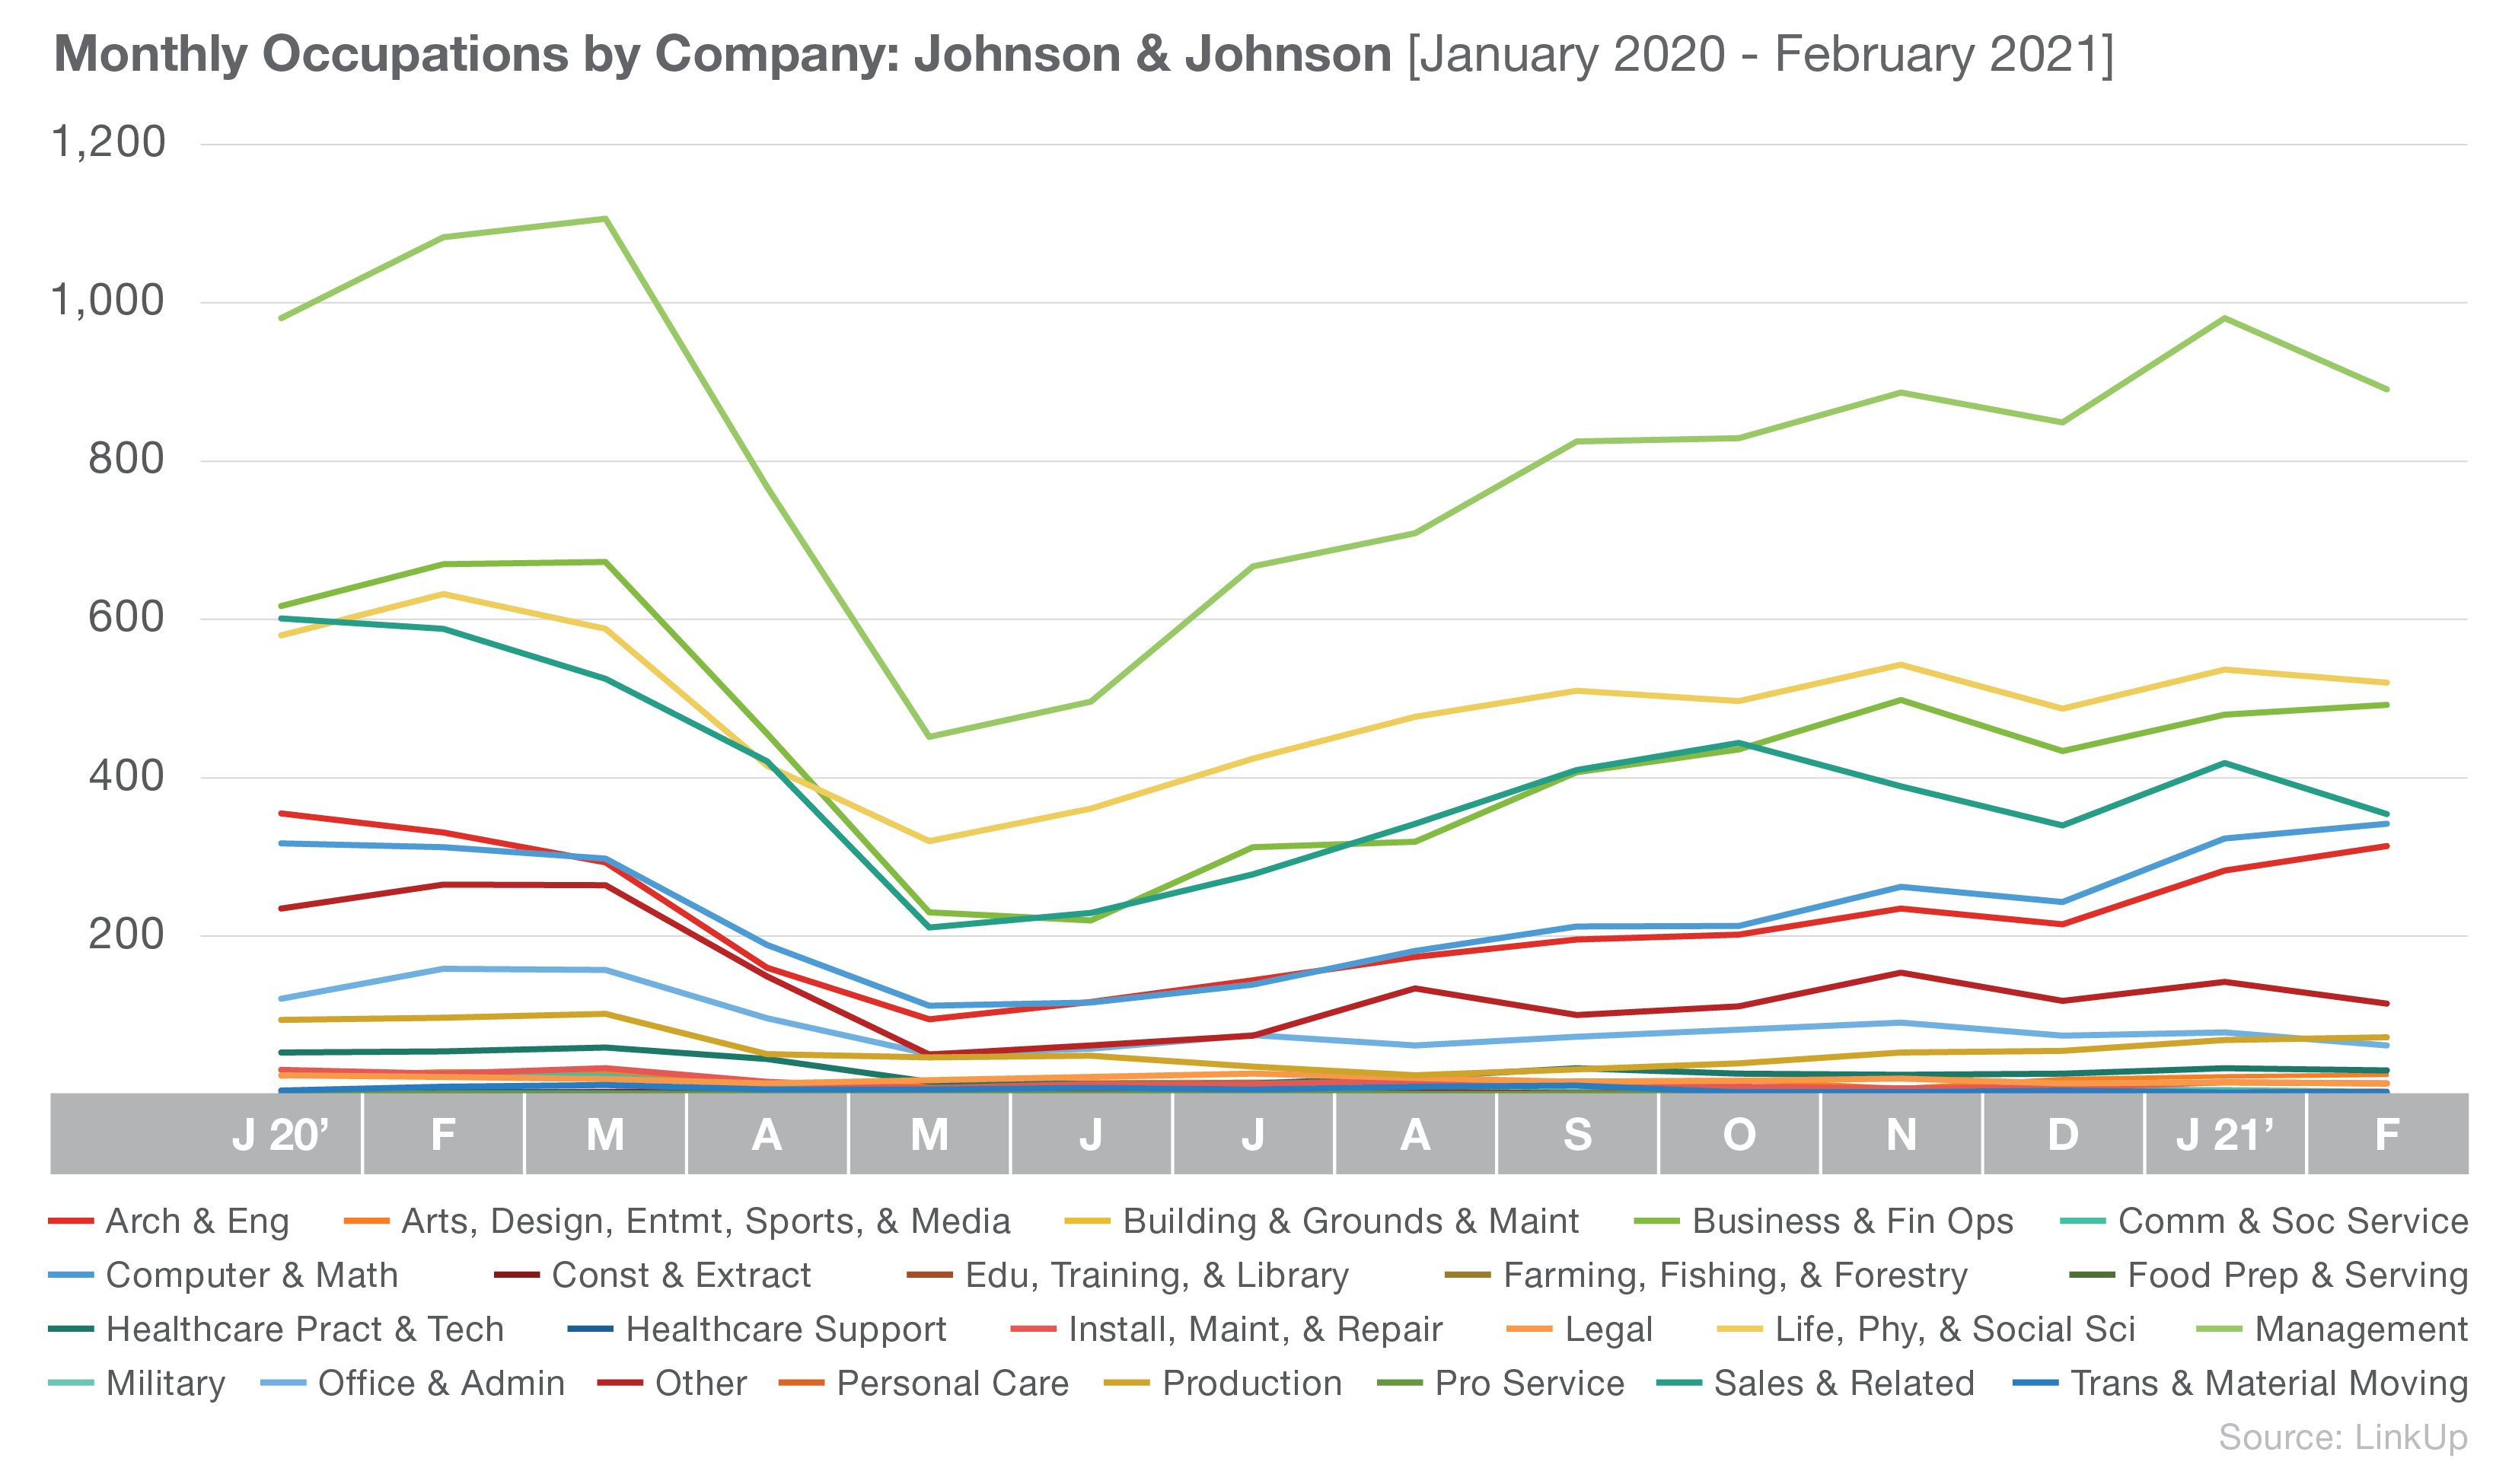 Monthly occupations by company - Johnson & Johnson